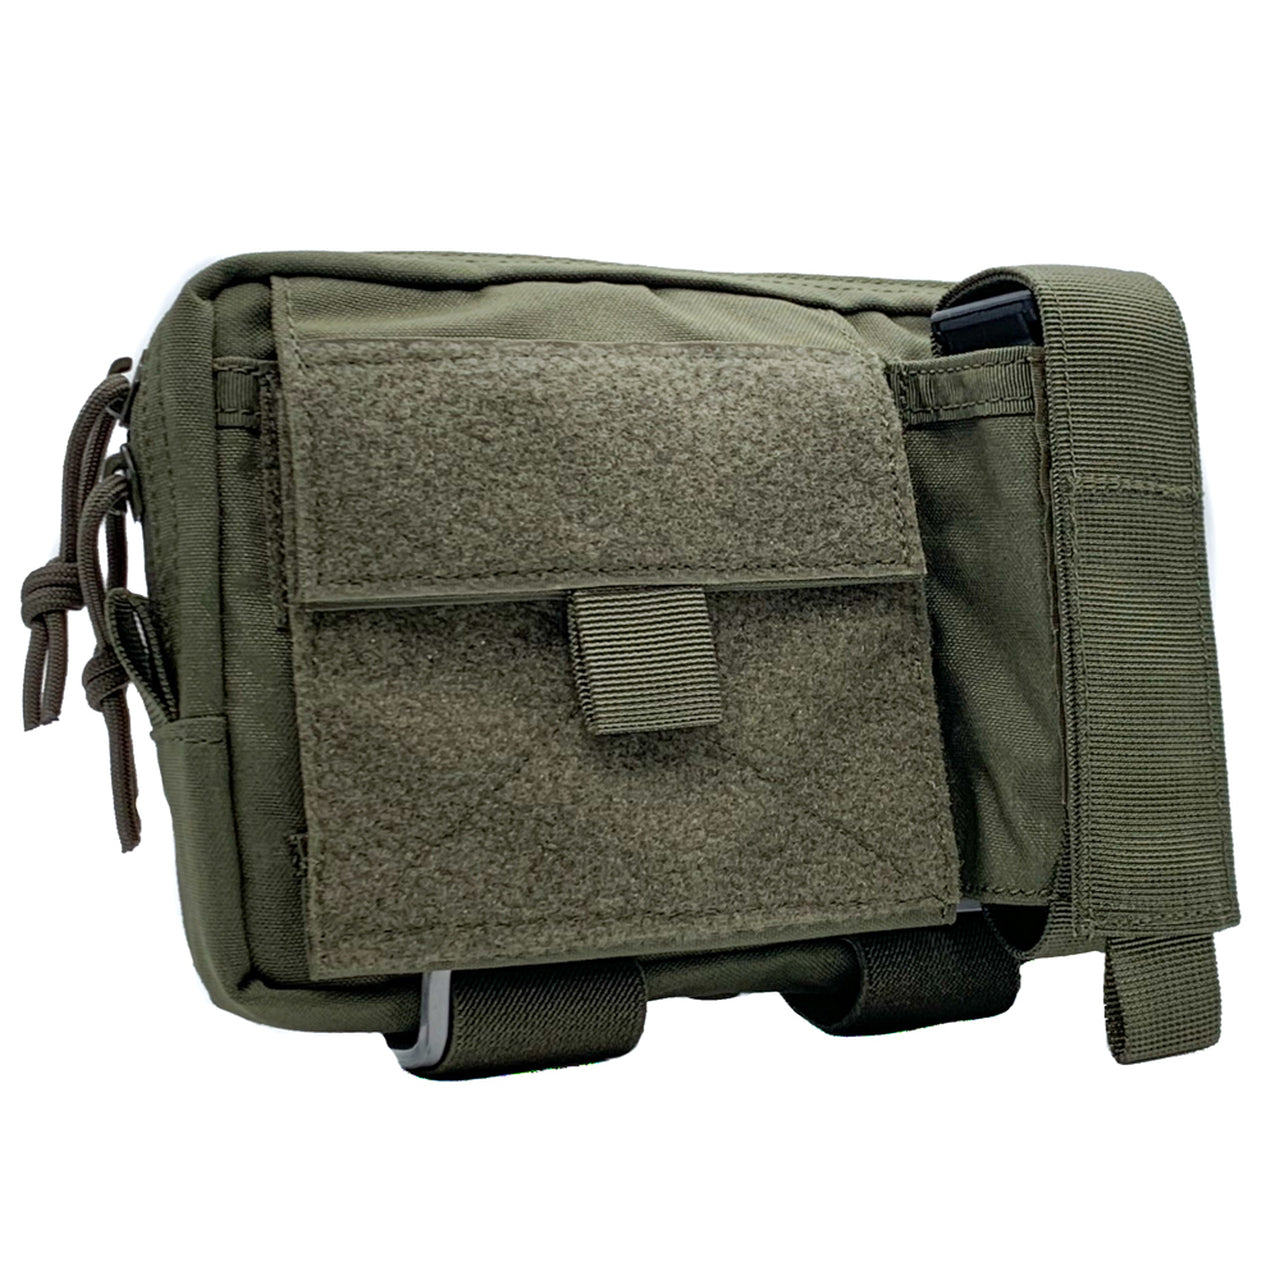 A Shellback Tactical Super Admin Pouch with a cell phone in it.